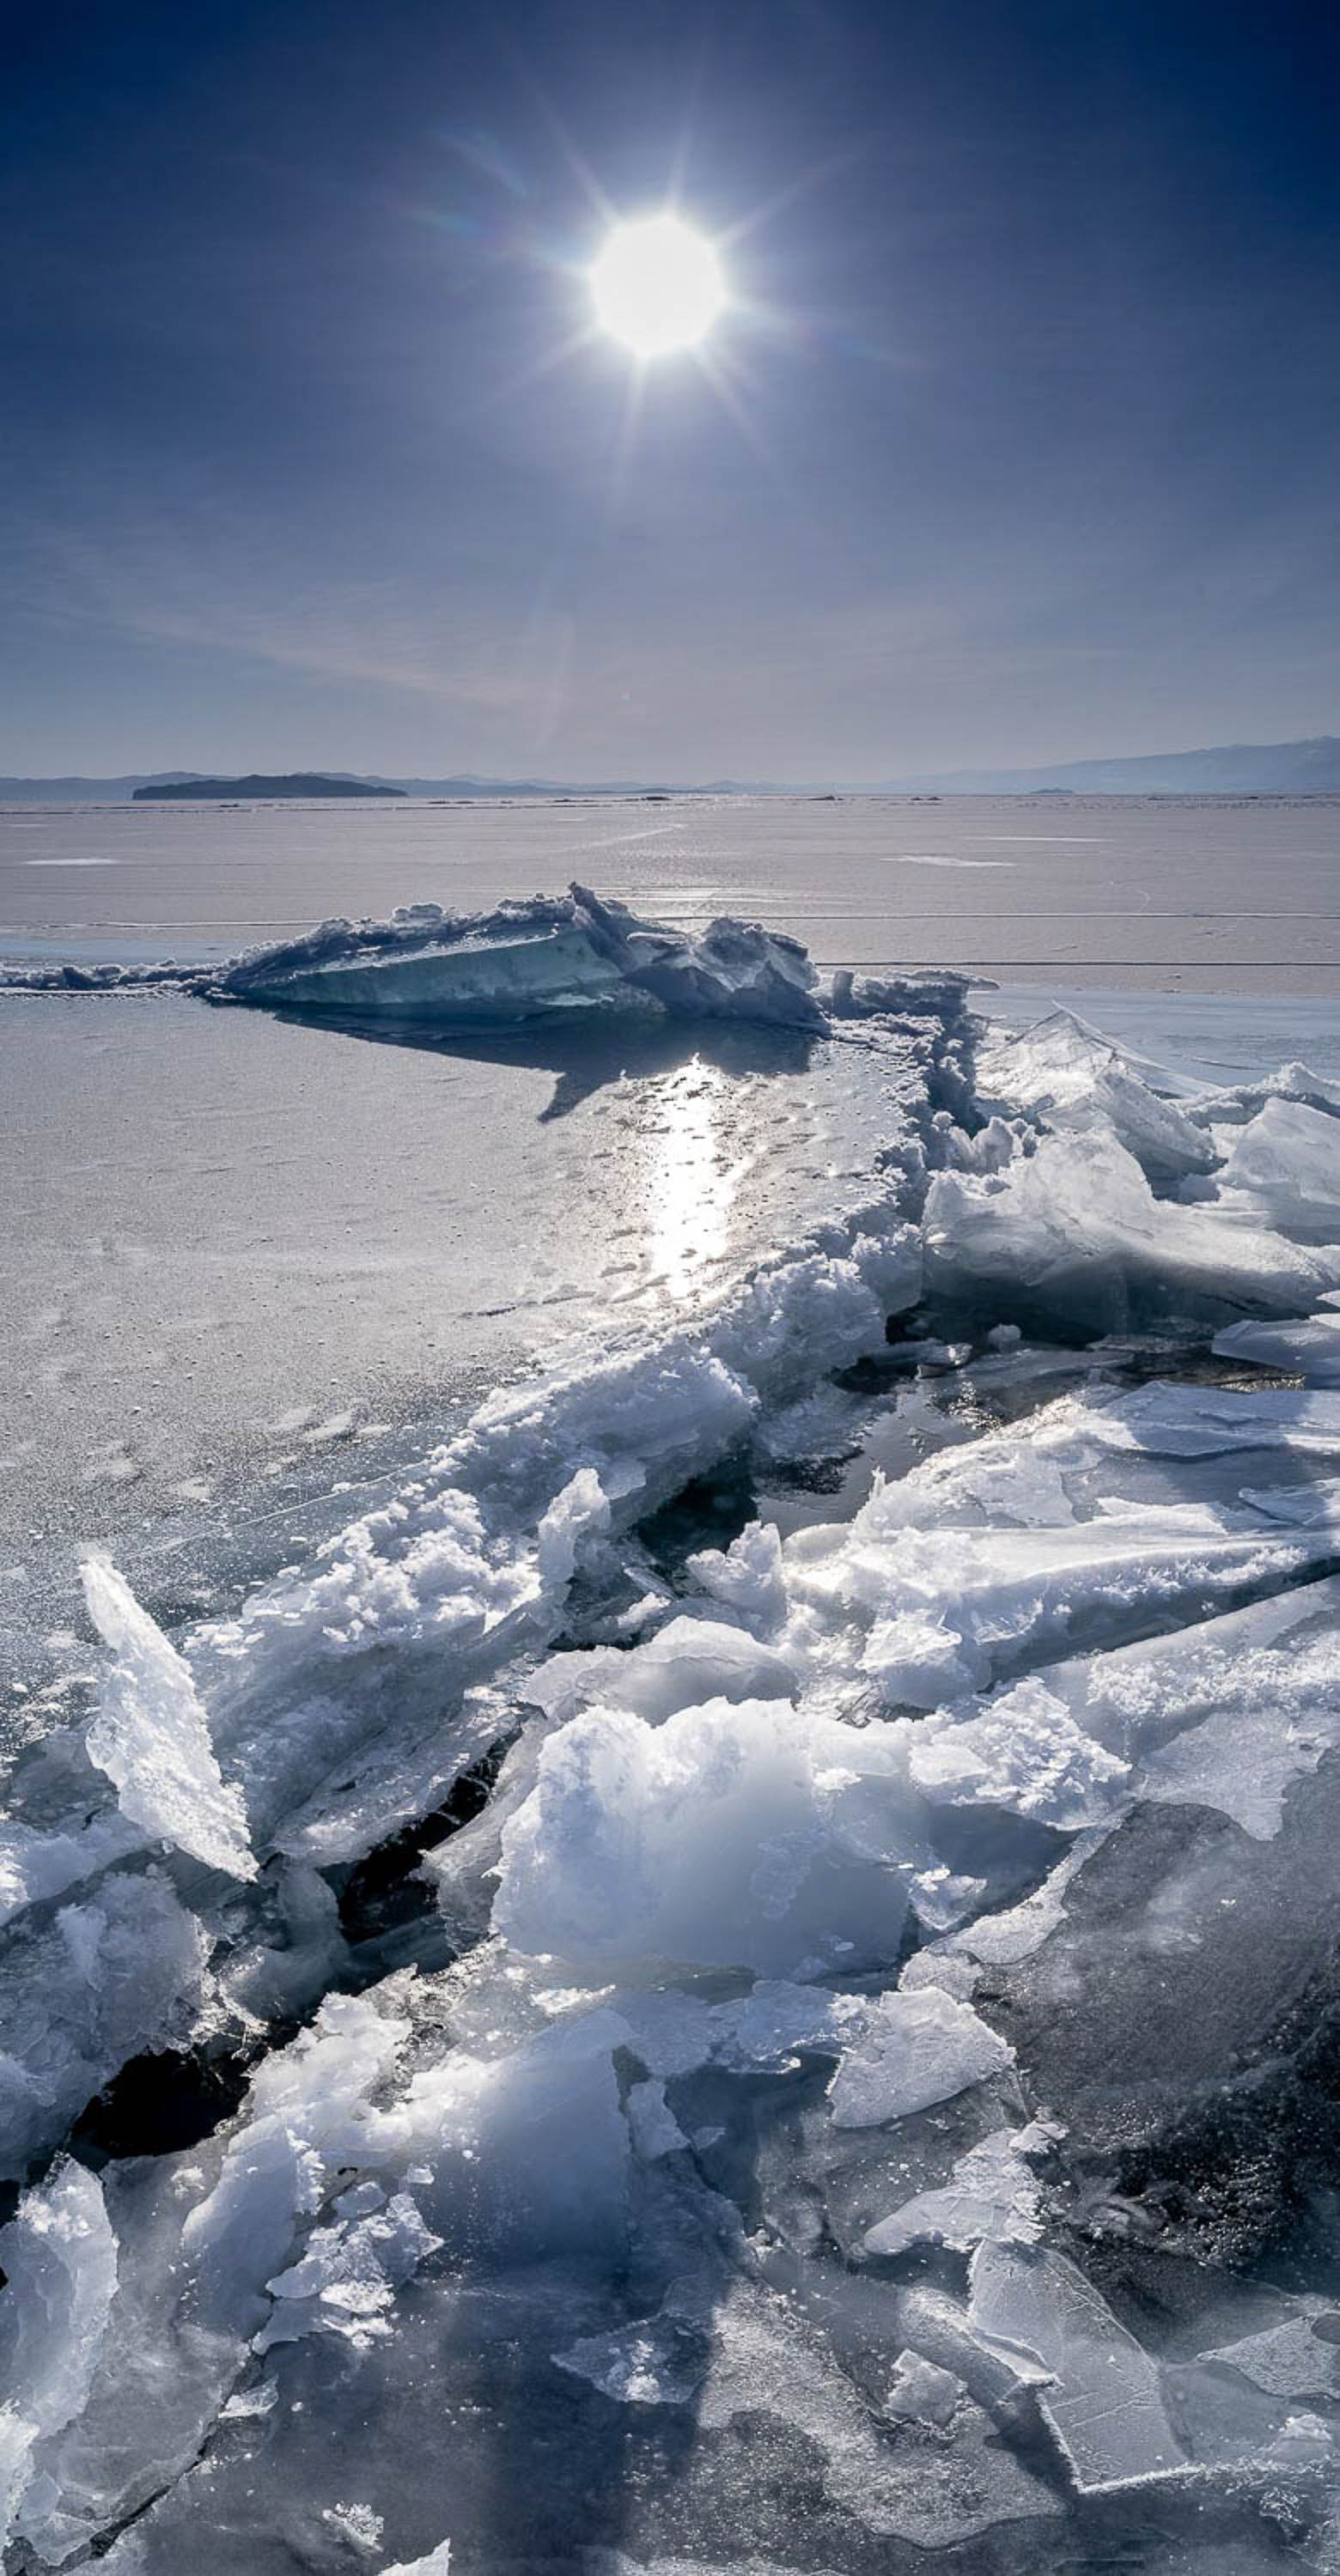 A thick and long crystalline ice line on a frozen surface, and the sun is shining, Lake Baikal #47, Siberia, Russia